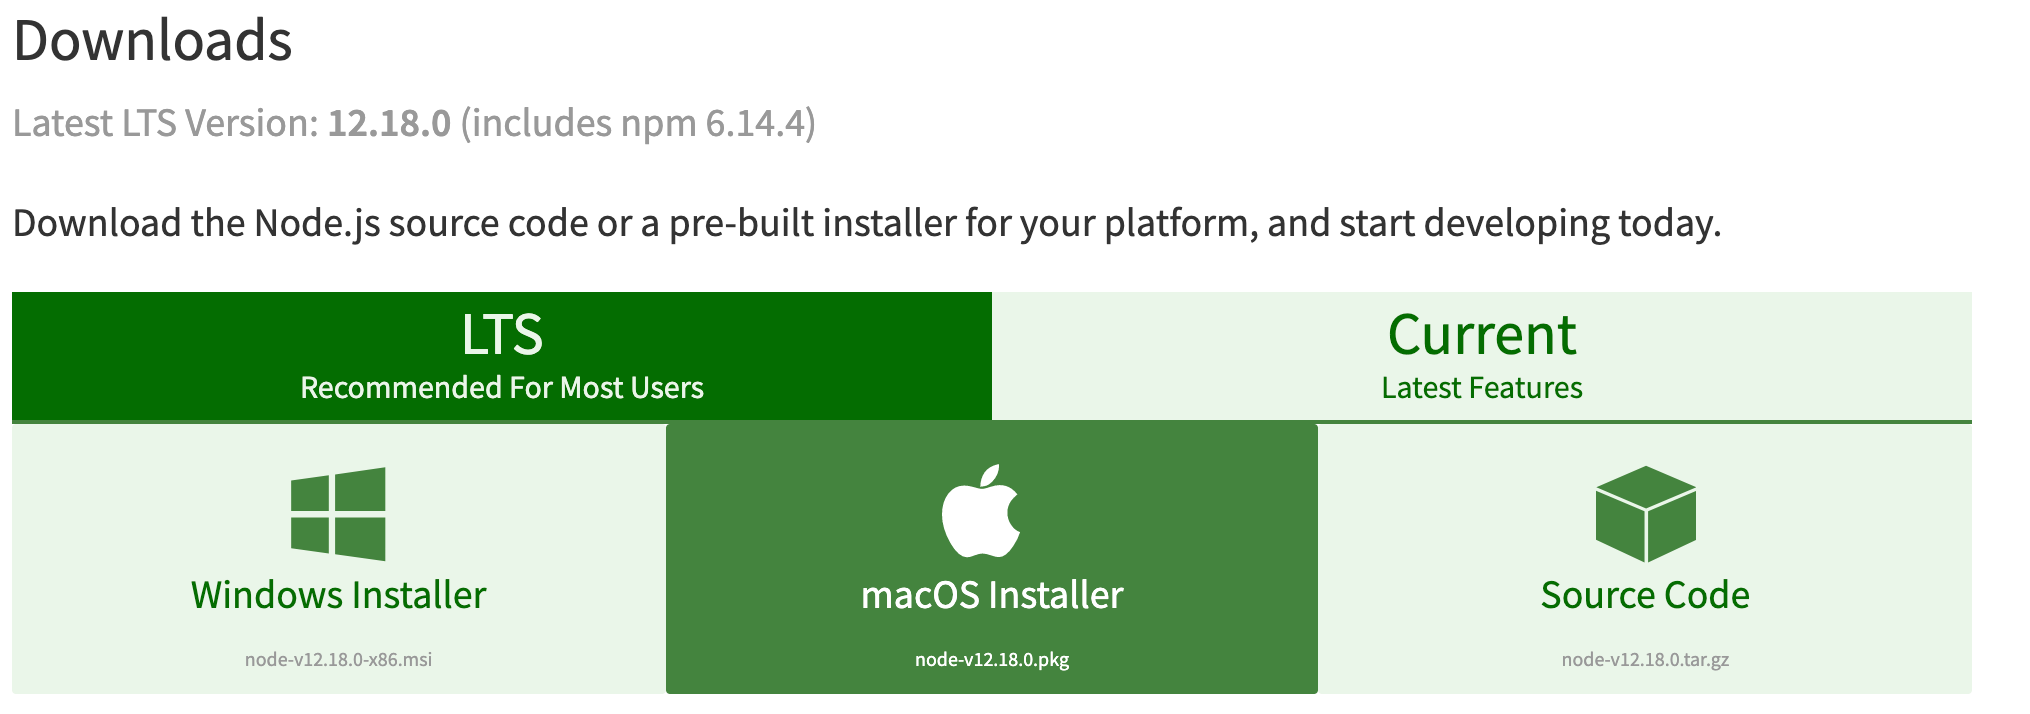 If you are working from a Mac, simply select “macOS Installer” highlighted in green.